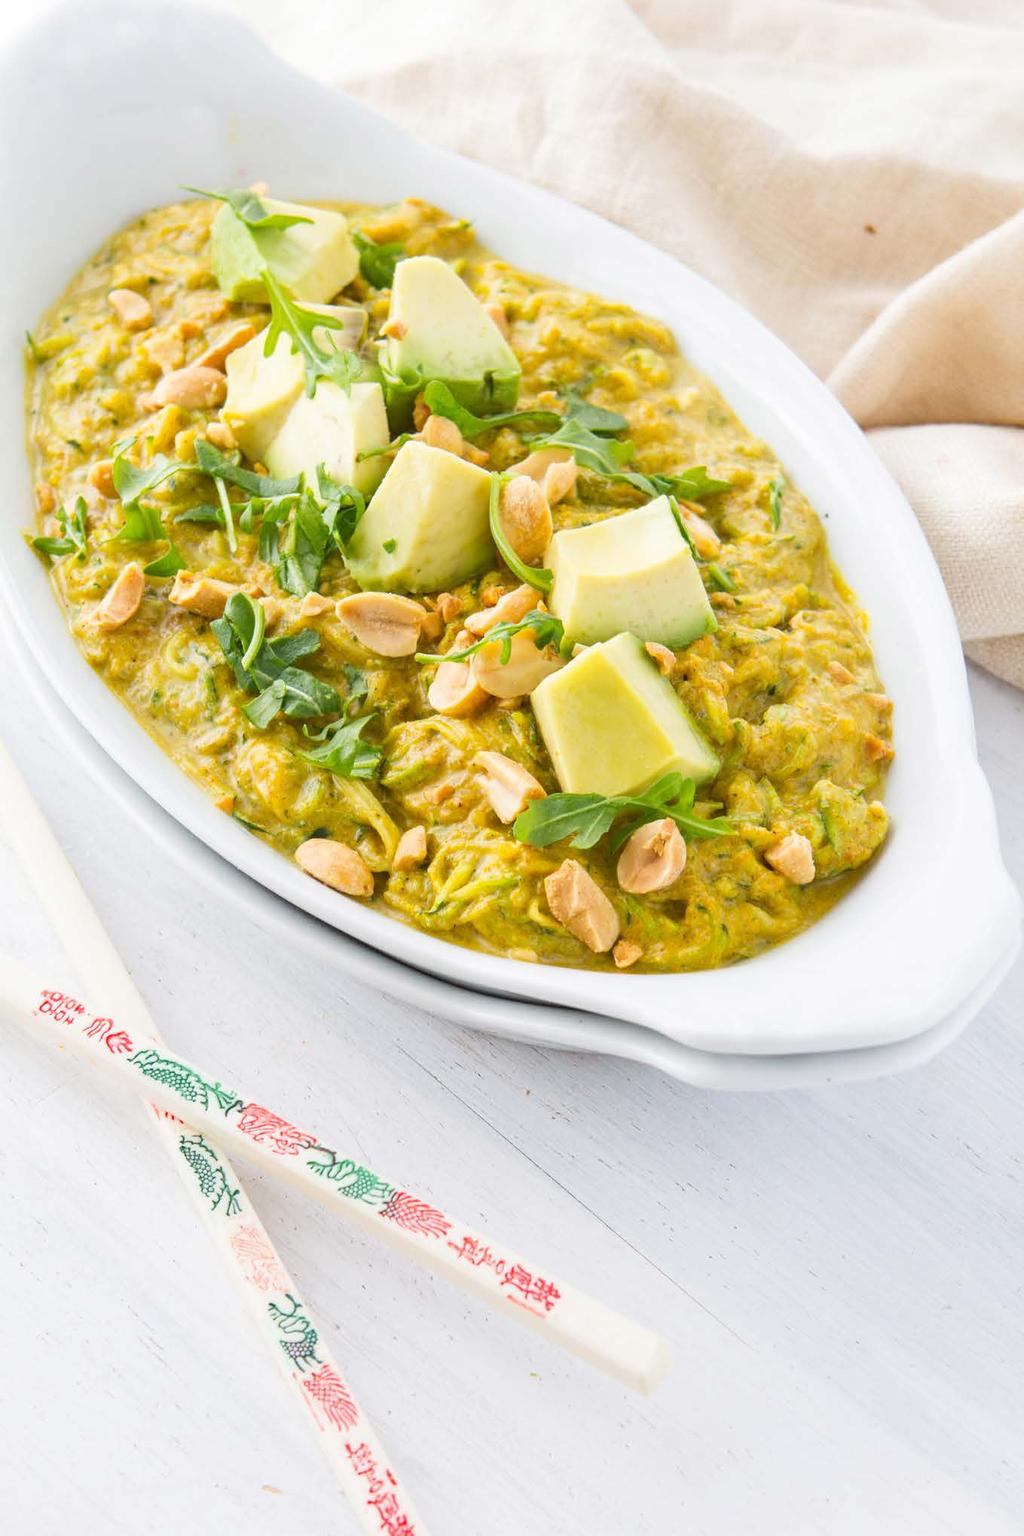 05 Curry Noodles 1 large zucchini 1 orange, peeled 1 cup red cherry tomatoes 1 tablespoon tahini dressing 1 teaspoon tumeric ¾ Tbsp curry powder A pinch of Braggs, Coconut Aminos, or Tamari 2 Tbsp